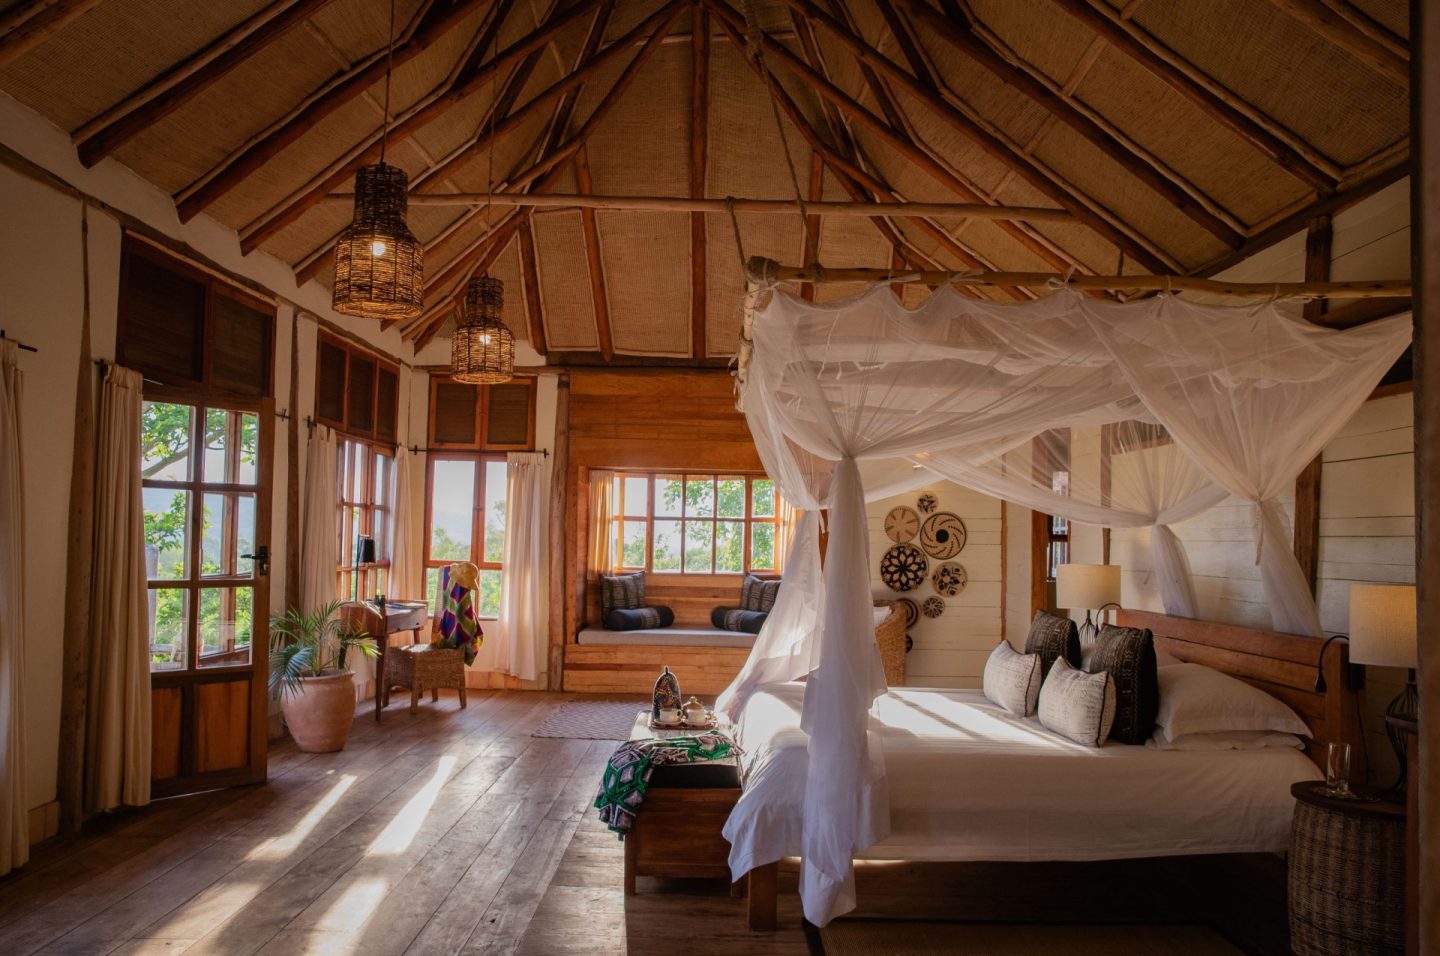 Stay: Large, open plan suites to lay your head at night, waking to the early morning bird song. ©Volcanoes Safari